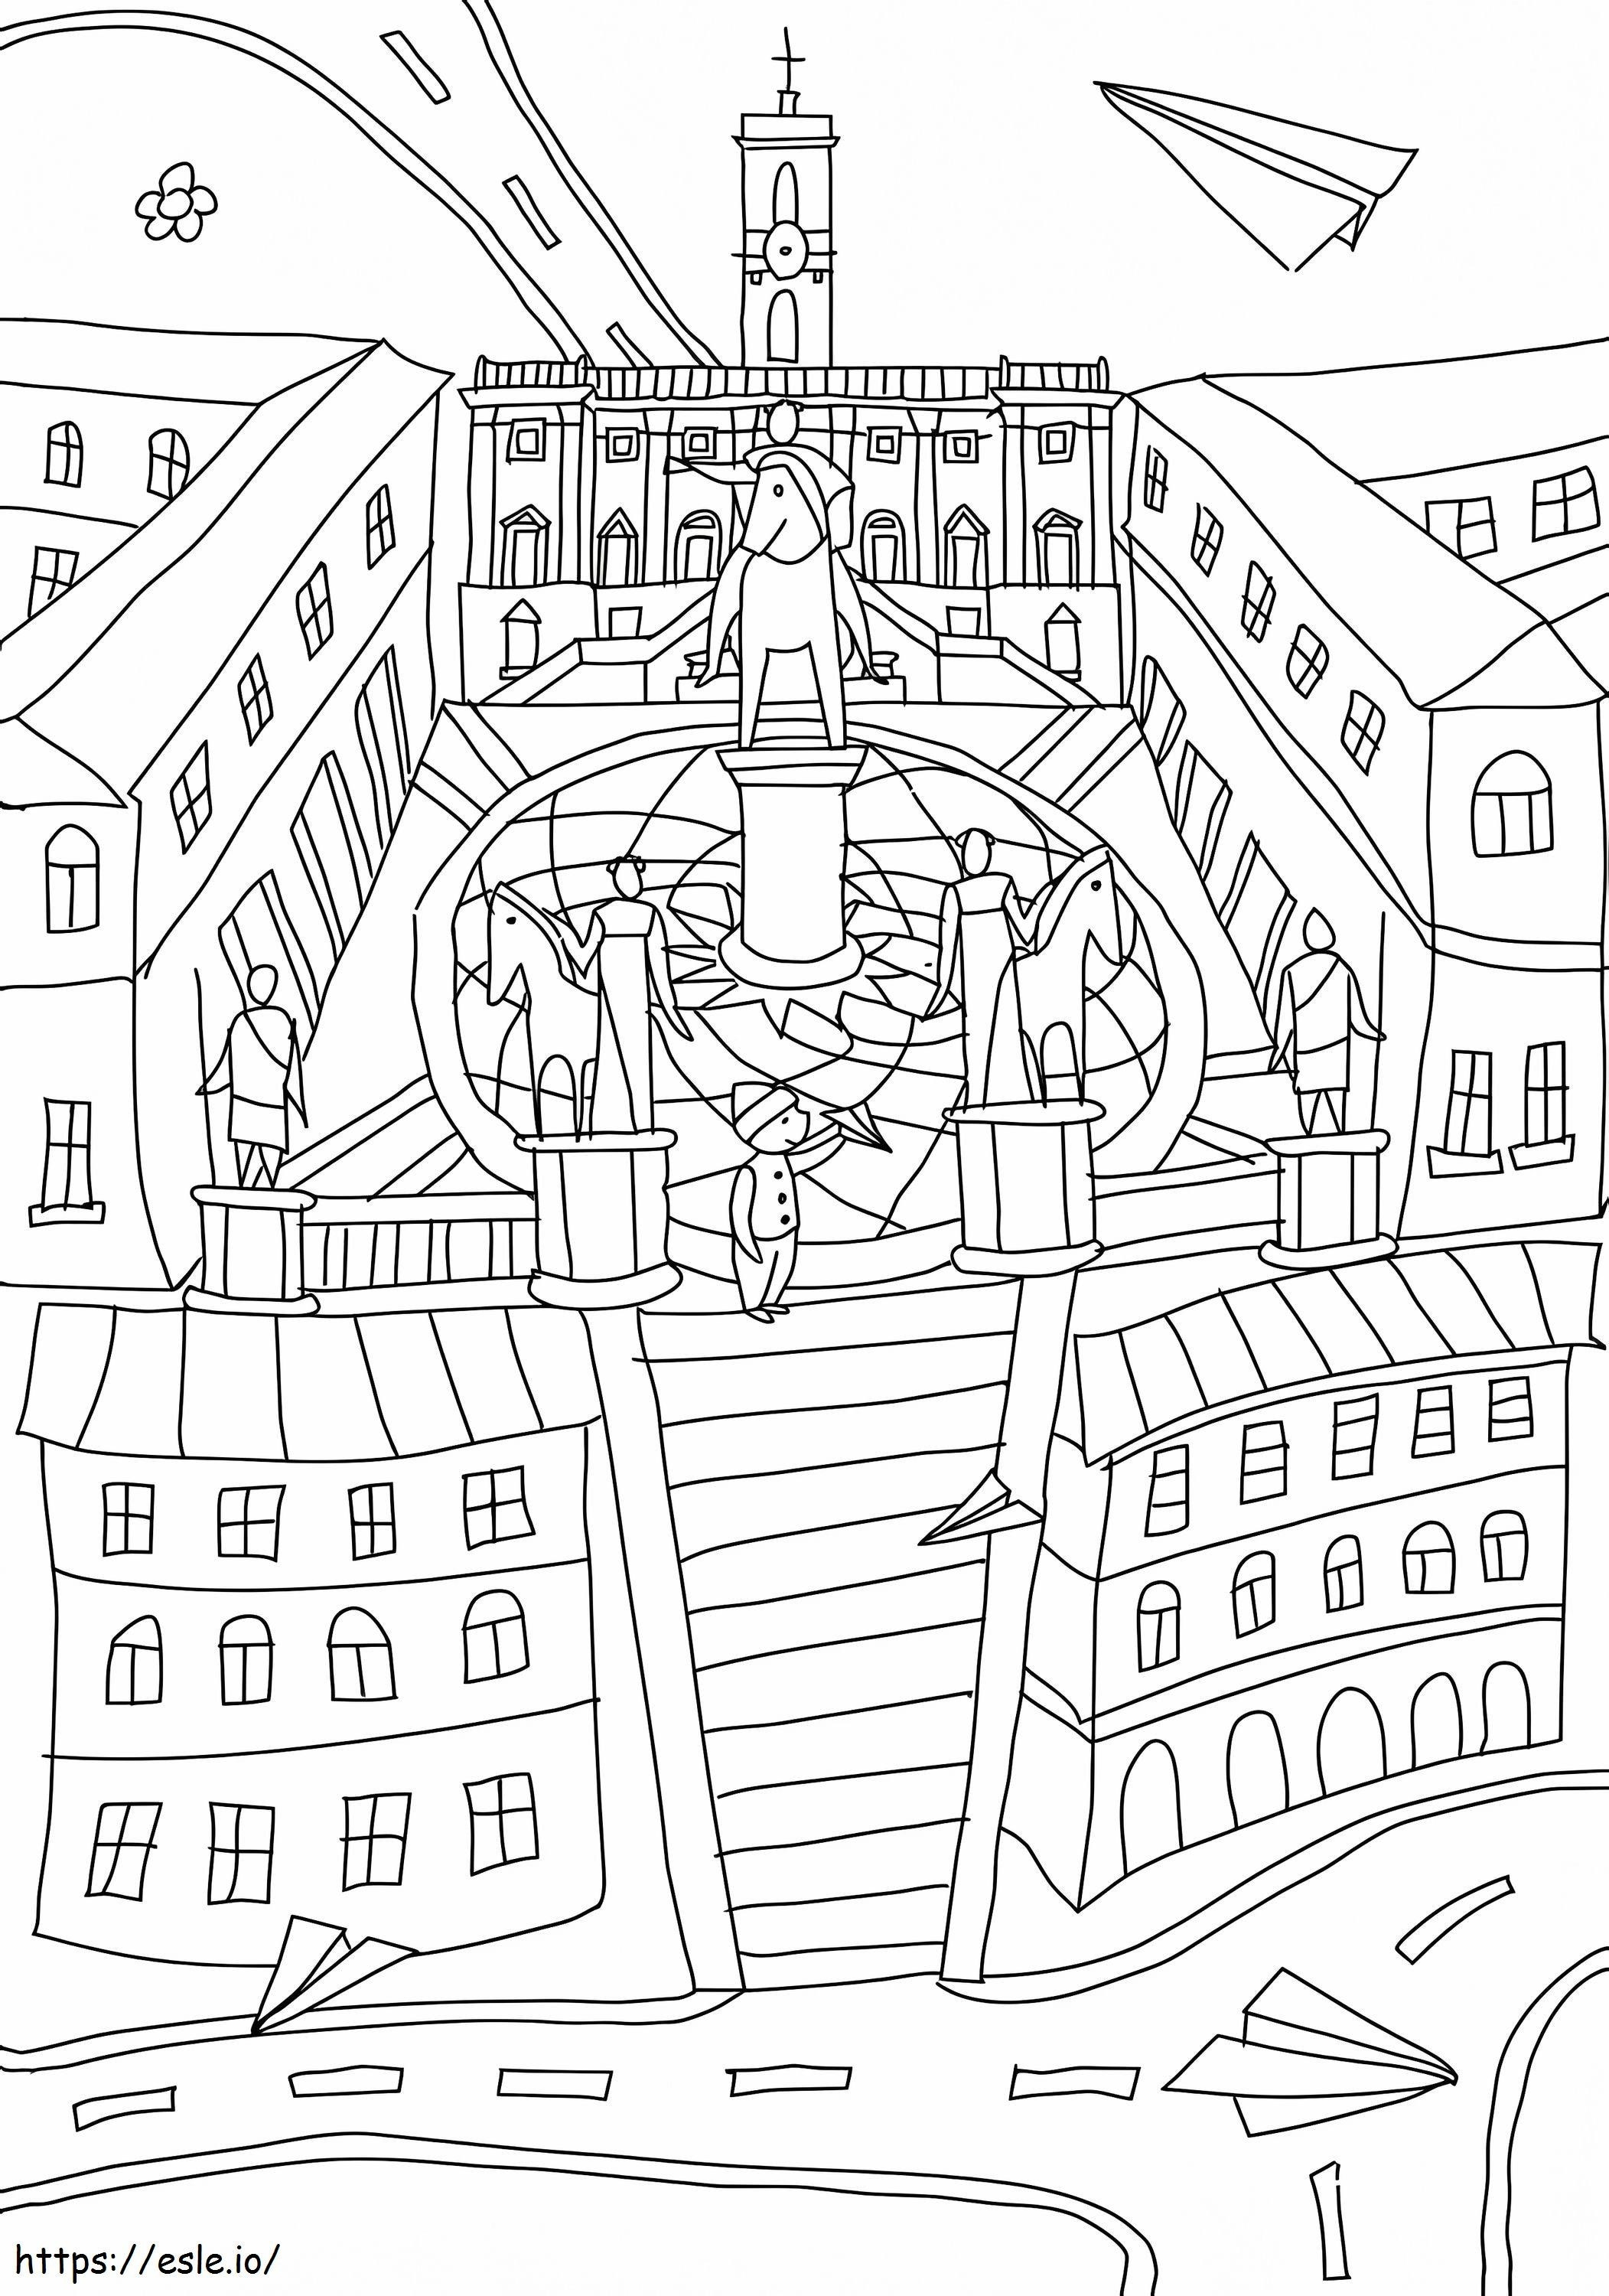 Capitoline Museums coloring page